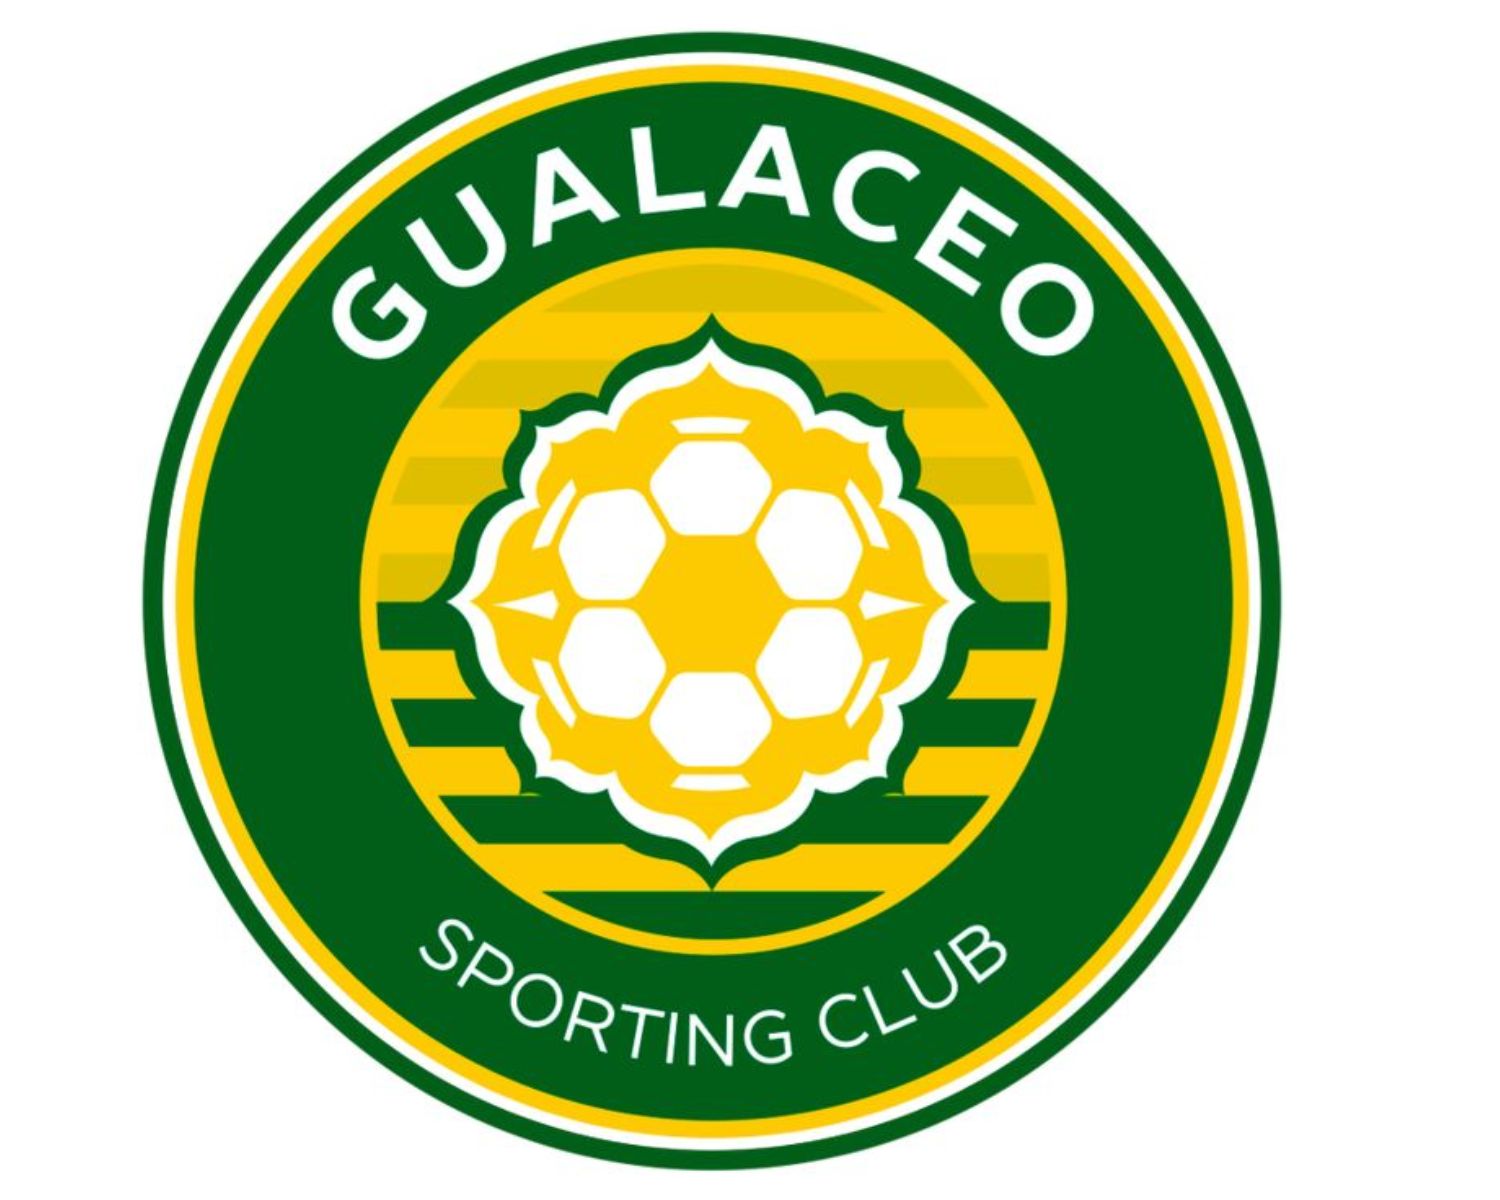 gualaceo-sporting-club-13-football-club-facts